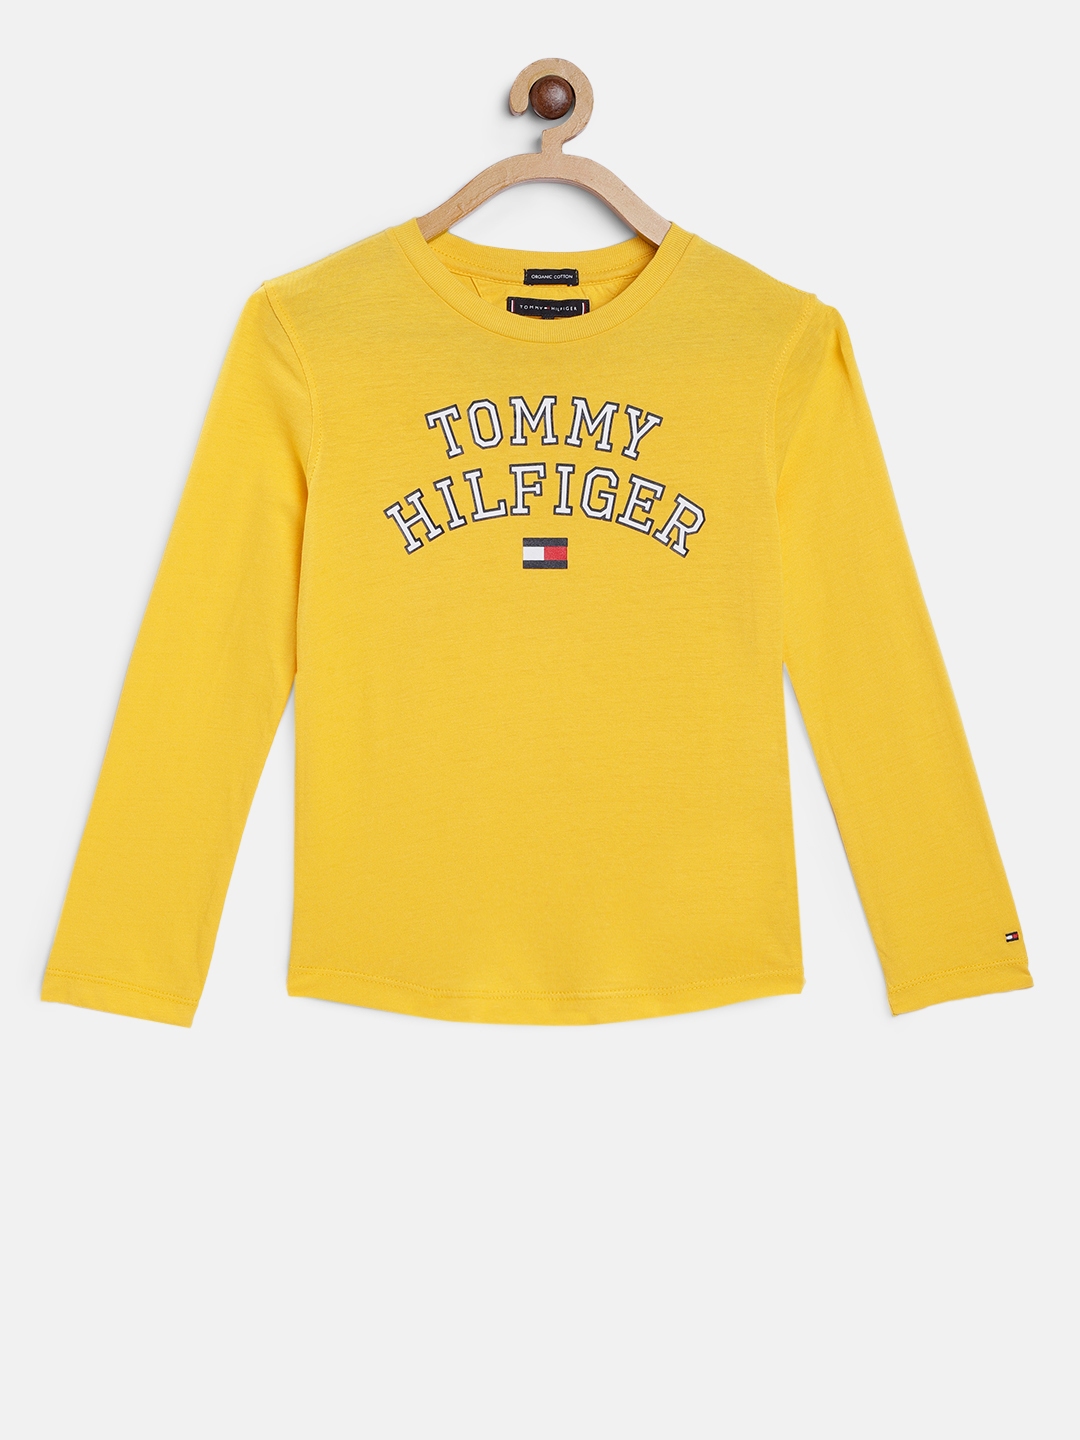 Buy Tommy Hilfiger Boys Yellow Printed Round Neck Pure Cotton T Shirt ...